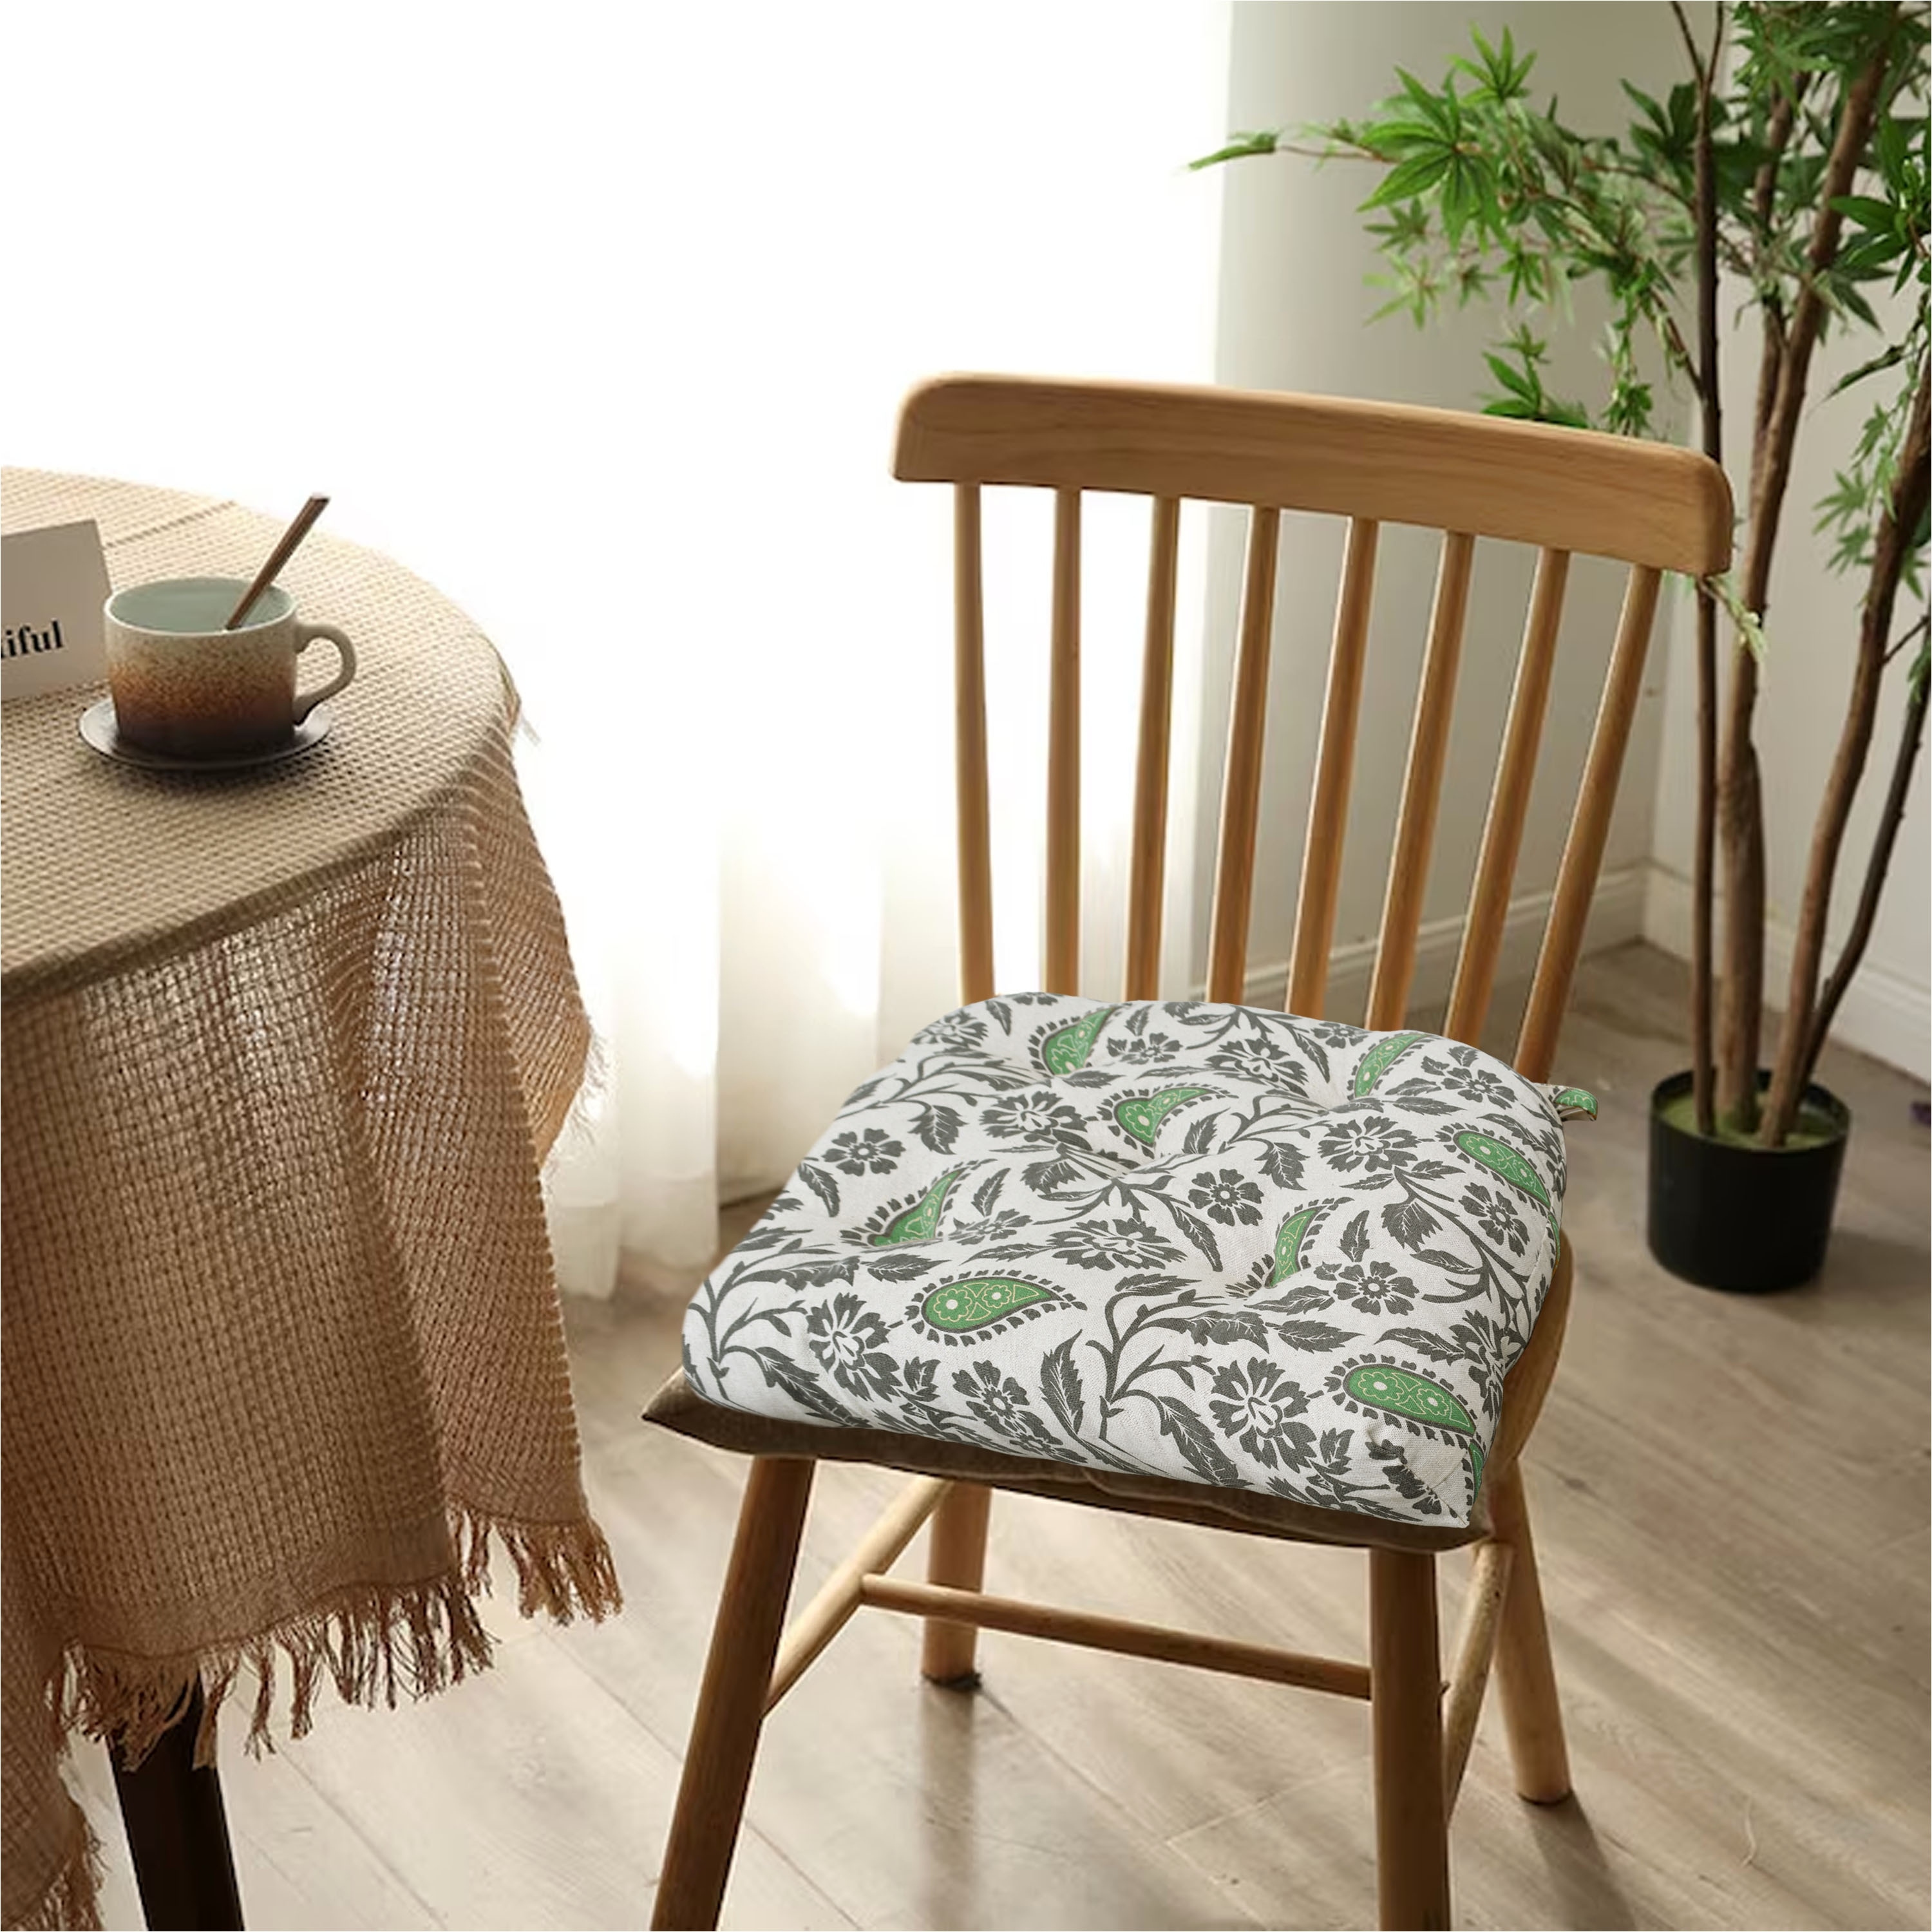 Dining Chair Pad With Ties, Chair Cushion Cotton, Seat Pads